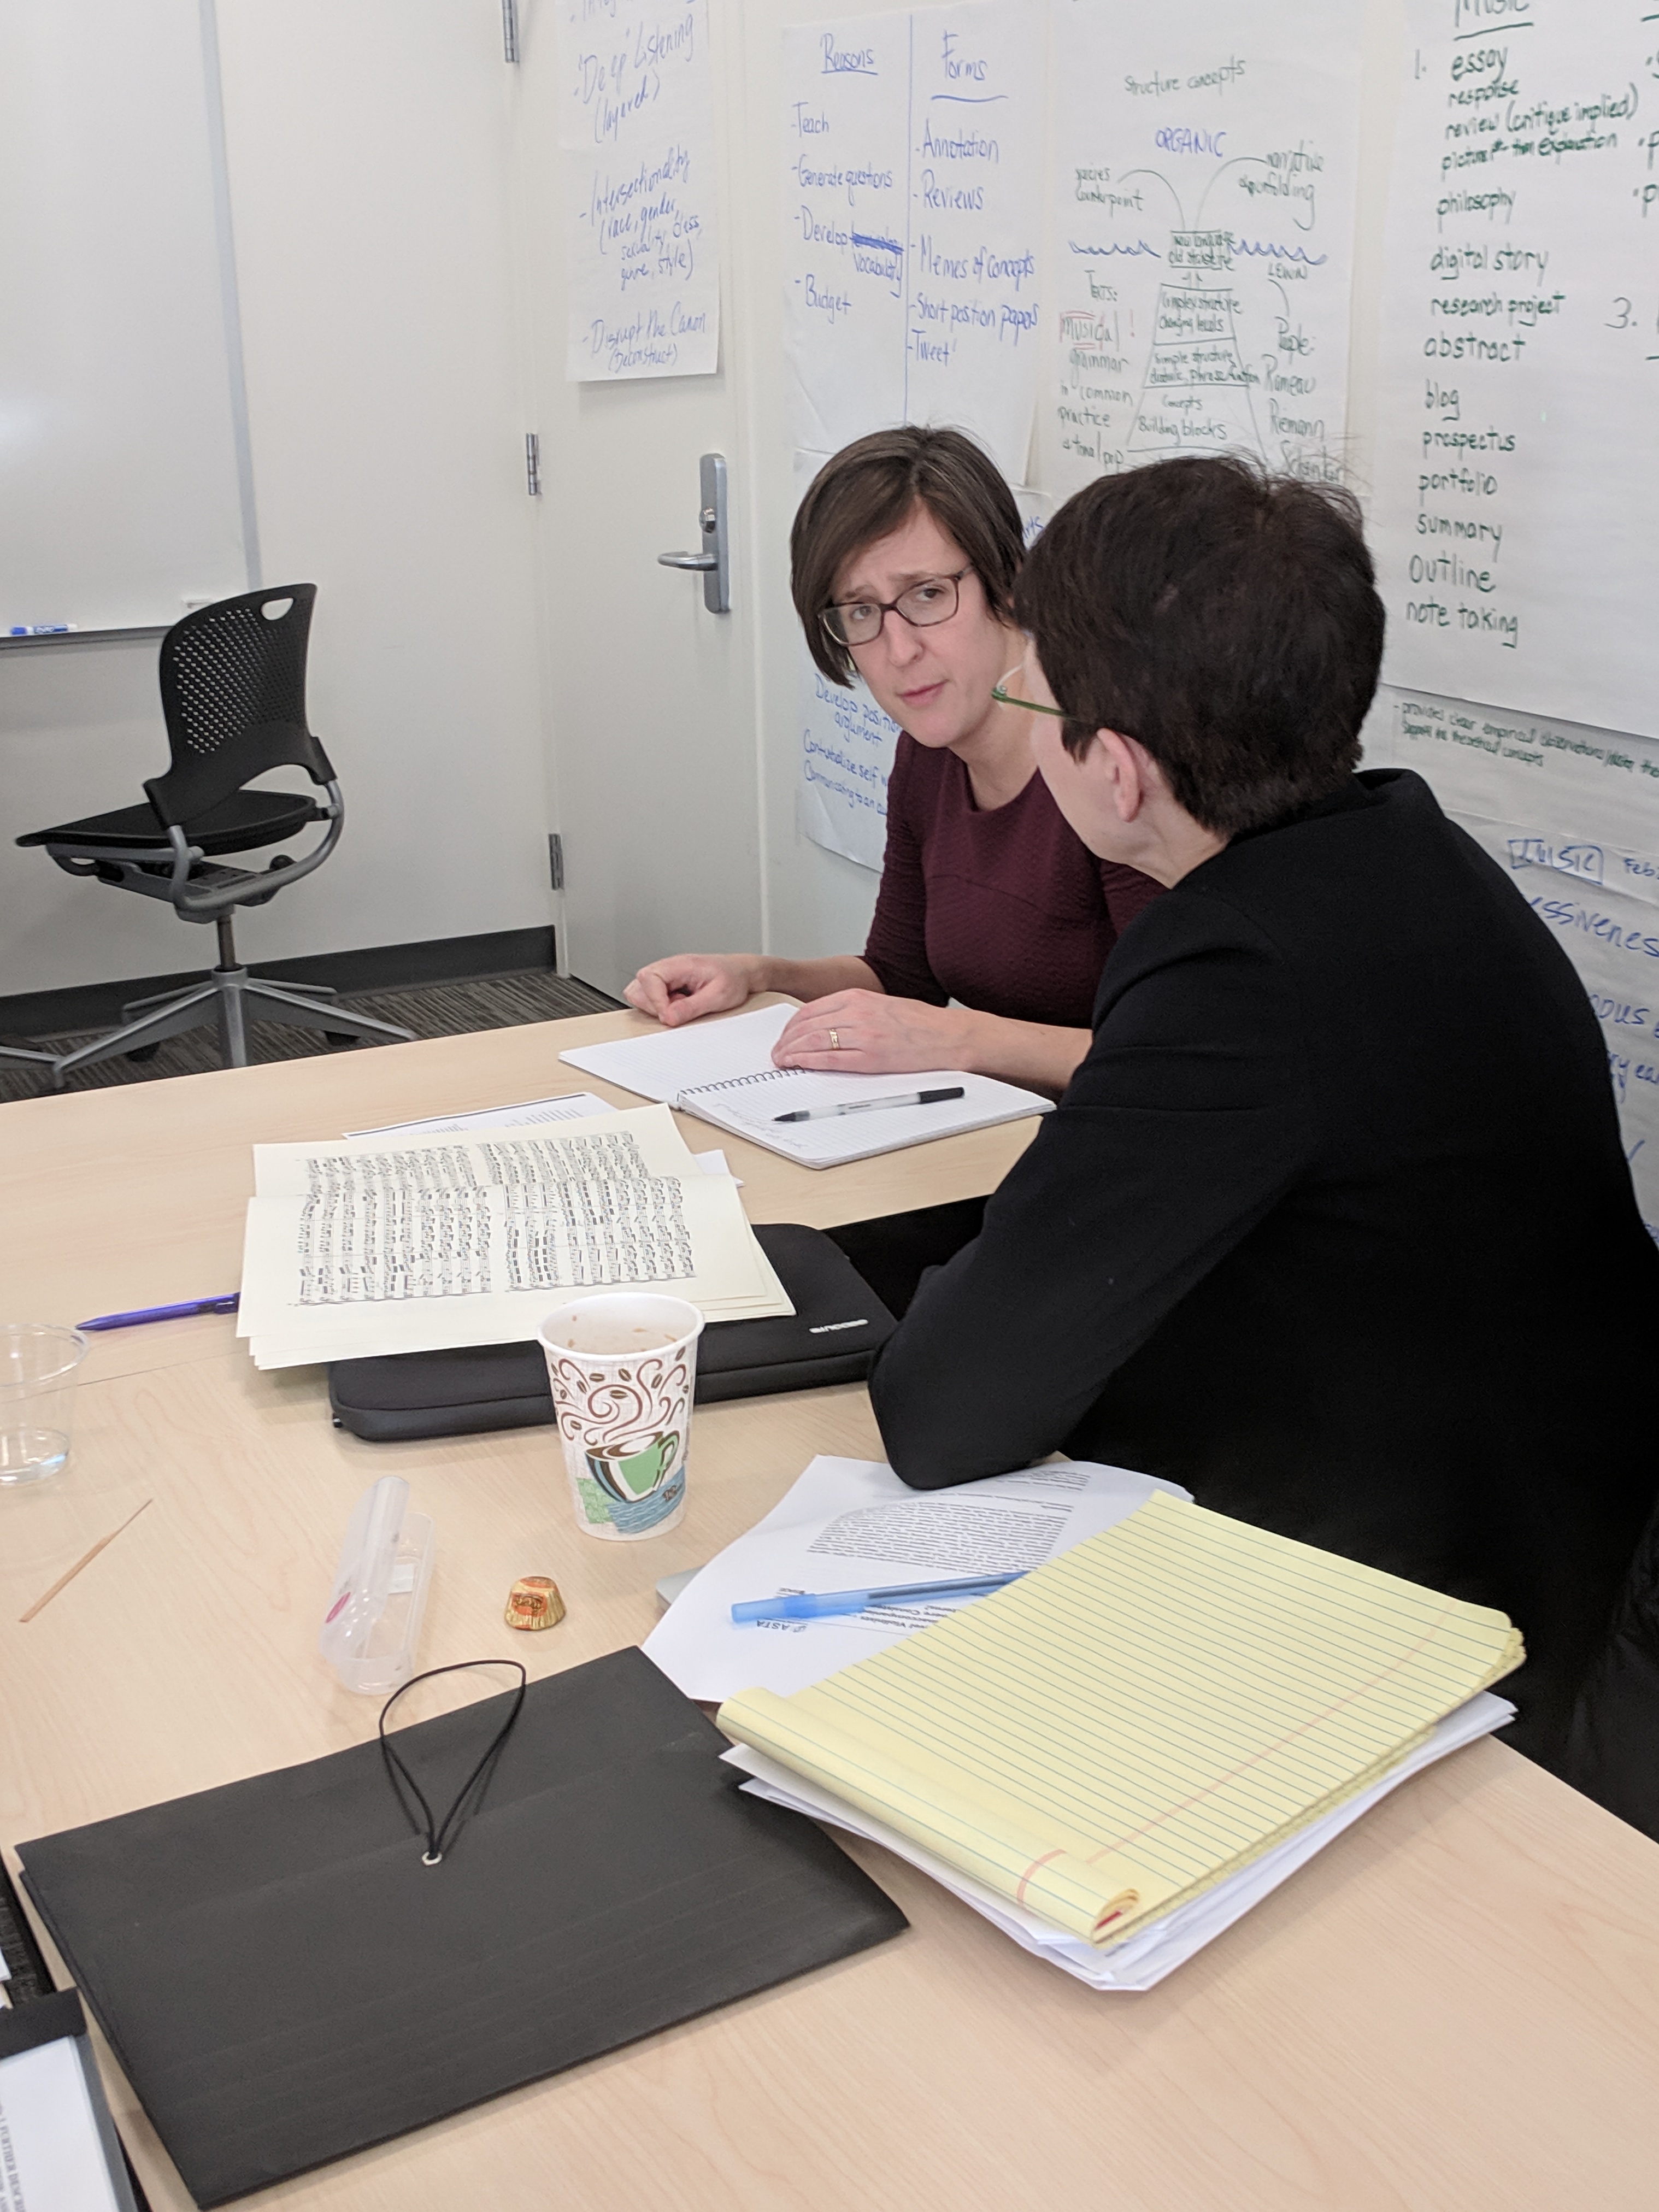 Brenda Mitchell (right) talks with Associate Professor of Art History Pepper Stetler (left) about a musical score during an HCWE Faculty Writing Fellows activity.